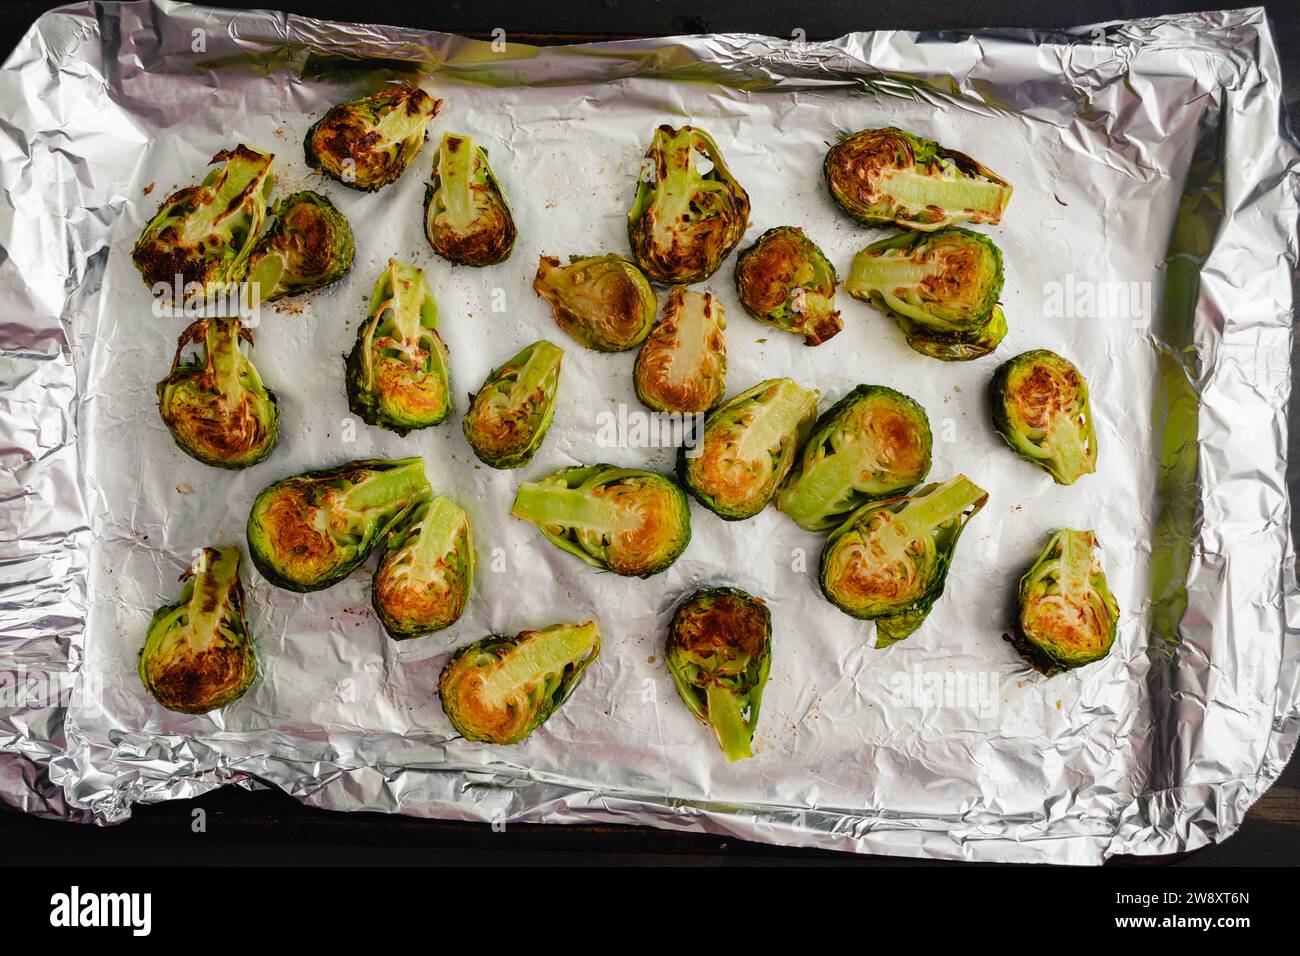 Roasted Brussels Sprout Haves on a Foil-Lined Sheet Pan: Browned baby cabbages on a cookie sheet covered with aluminum foil Stock Photo